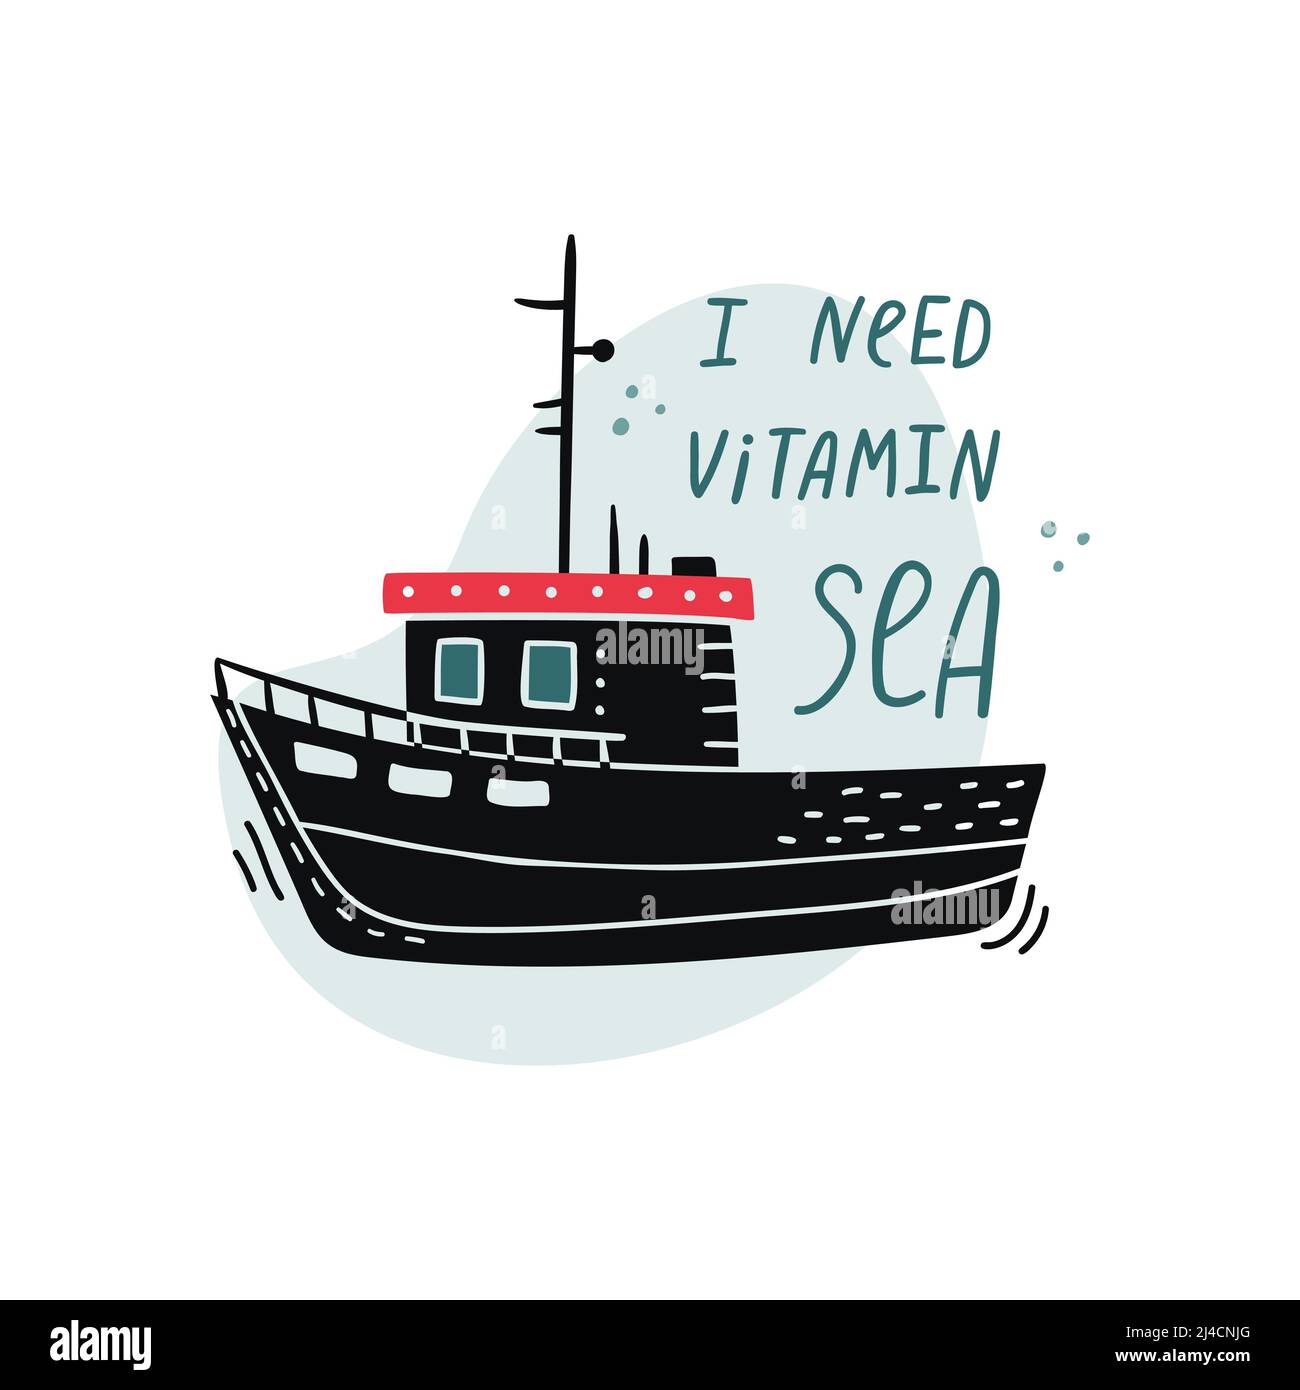 Vector illustration of a boat with hand drawn lettering - I need vitamin sea Stock Vector